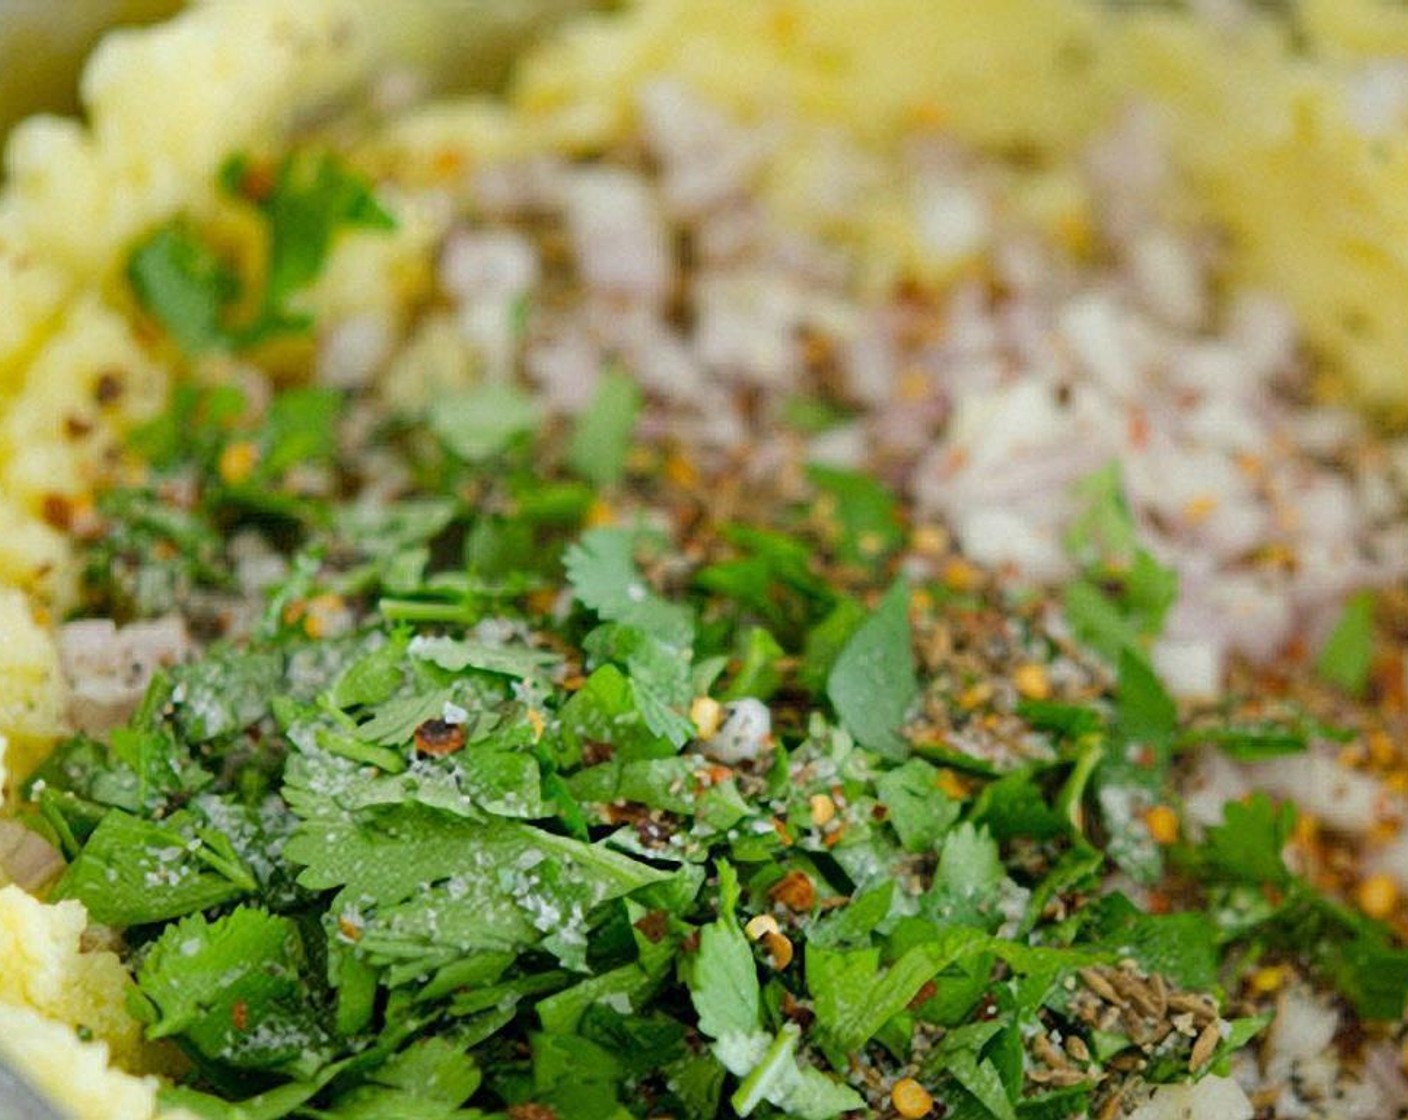 step 4 Add the cumin seeds, Shallots (2), Crushed Red Pepper Flakes (1/2 tsp), and Fresh Cilantro (1 bunch), Salt (to taste) and Ground Black Pepper (1/2 tsp) to taste.